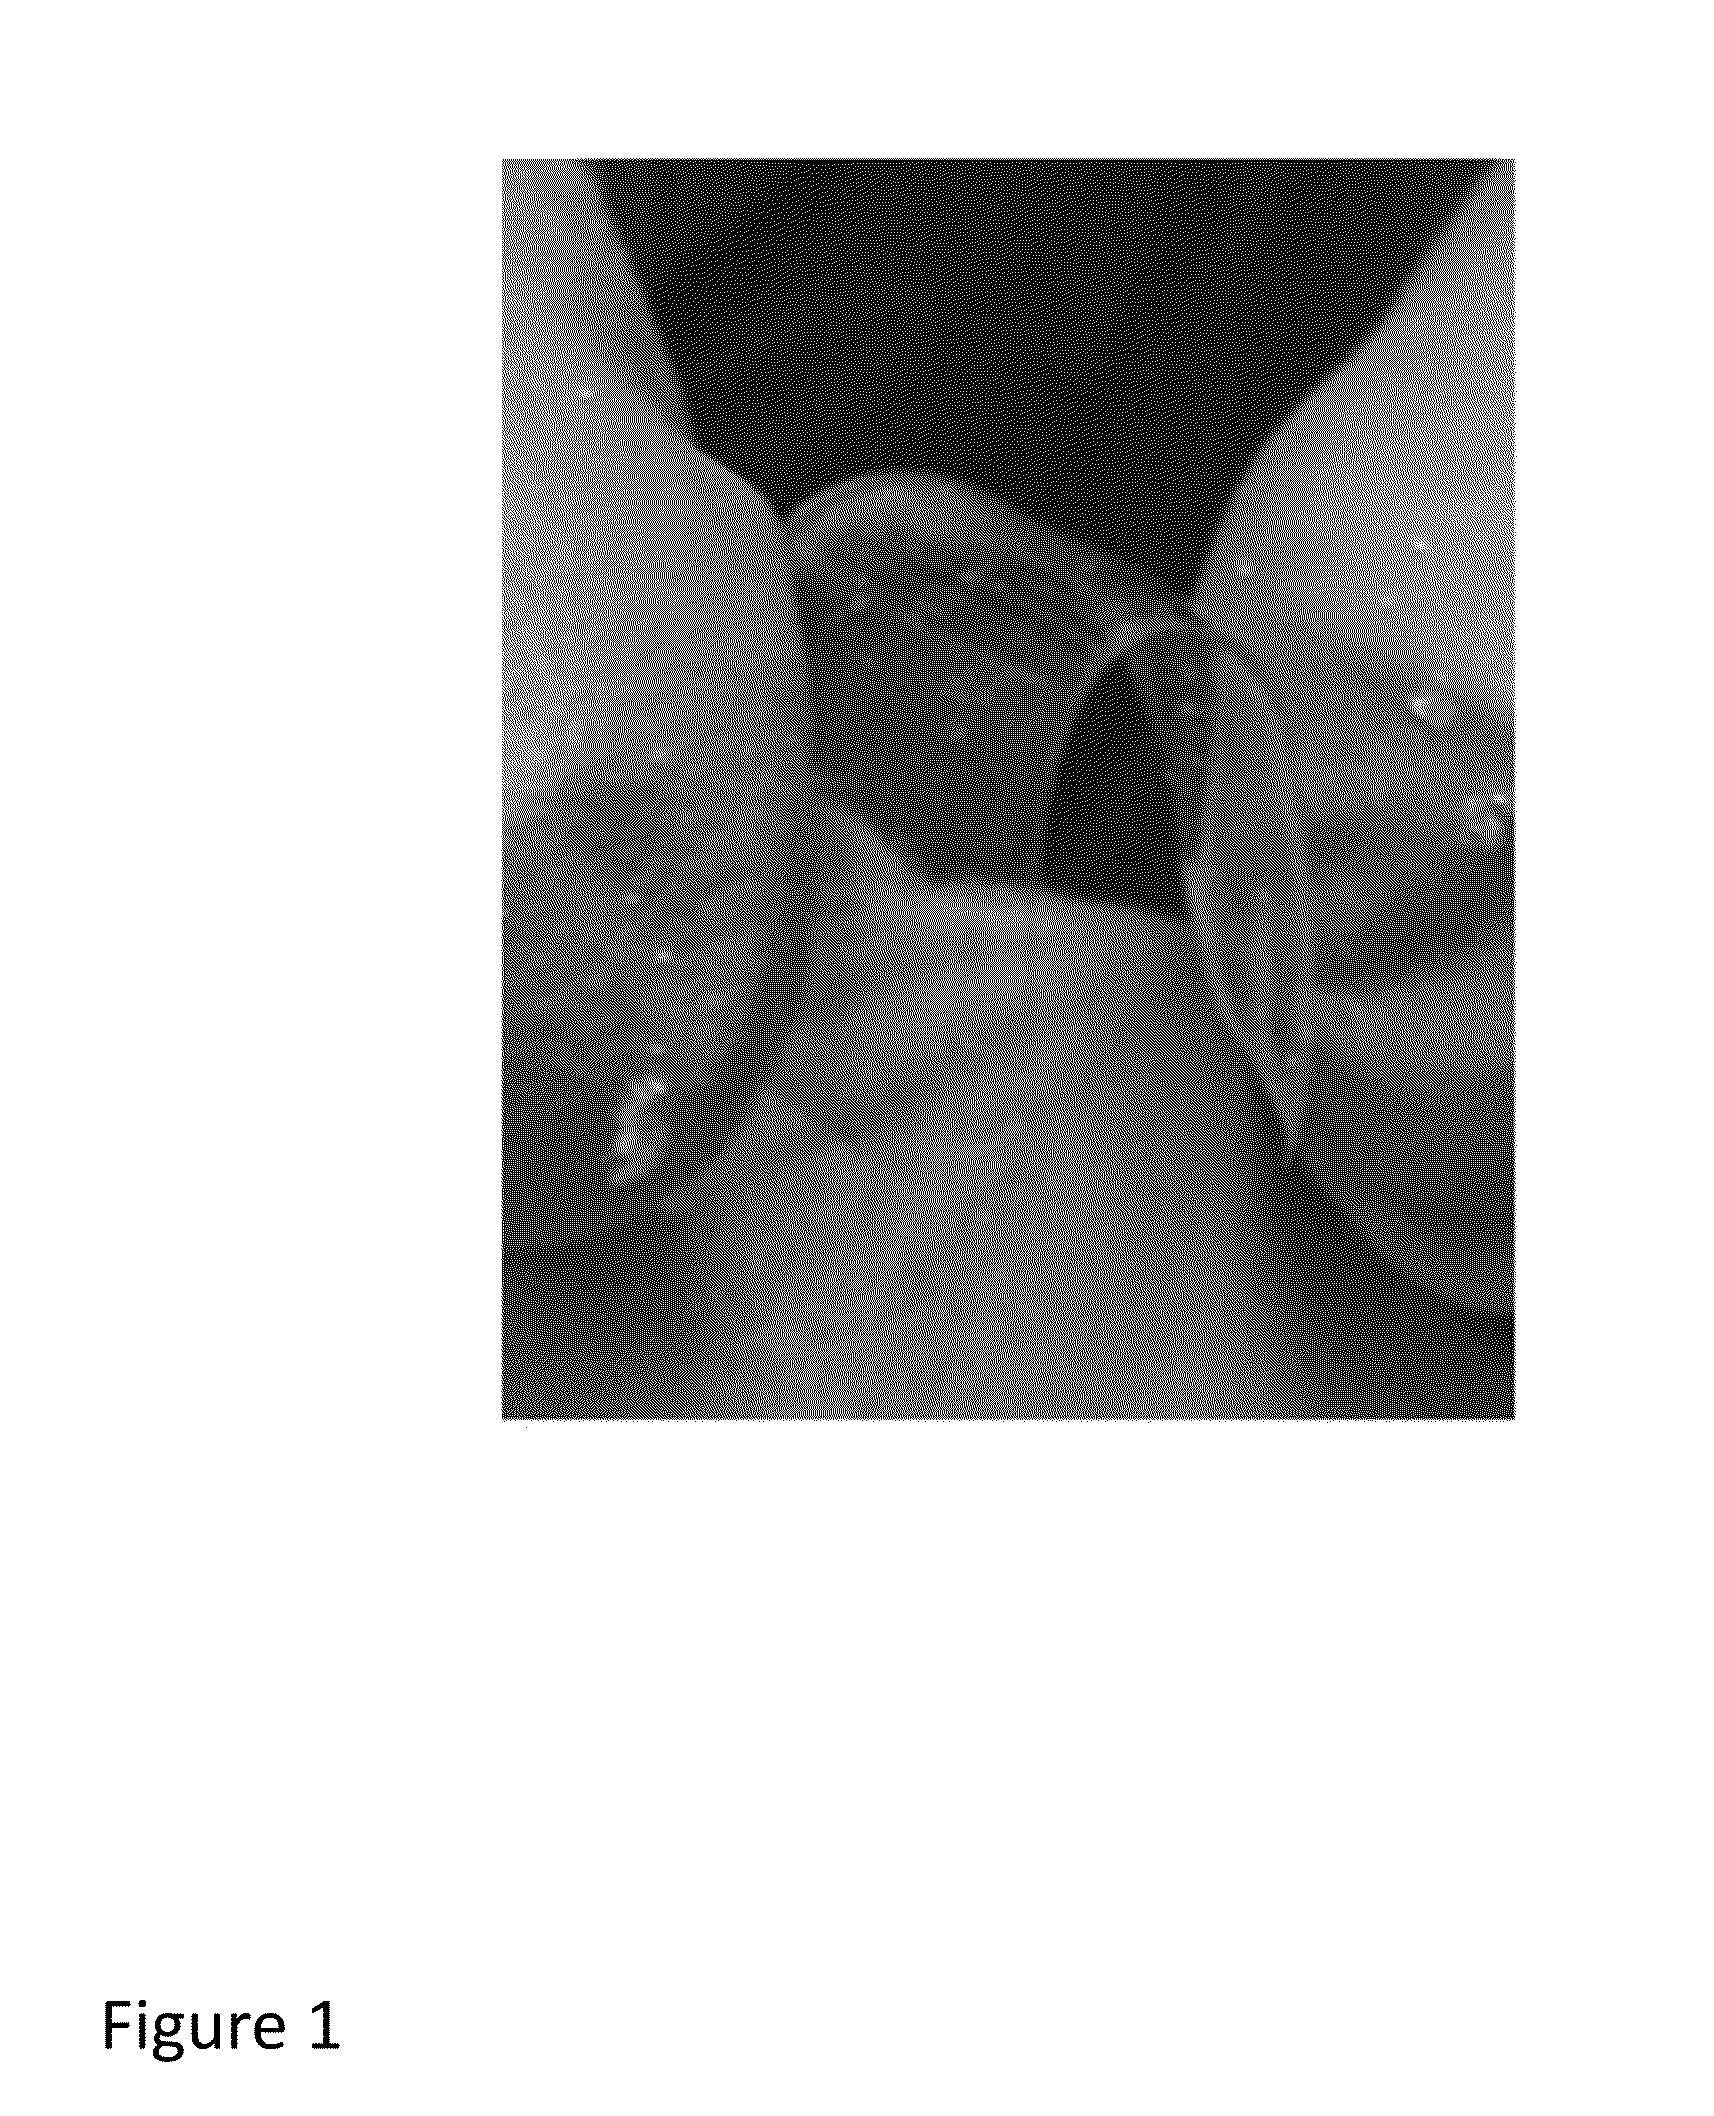 Polymer-tissue hybrid biomaterials and methods of making and using same